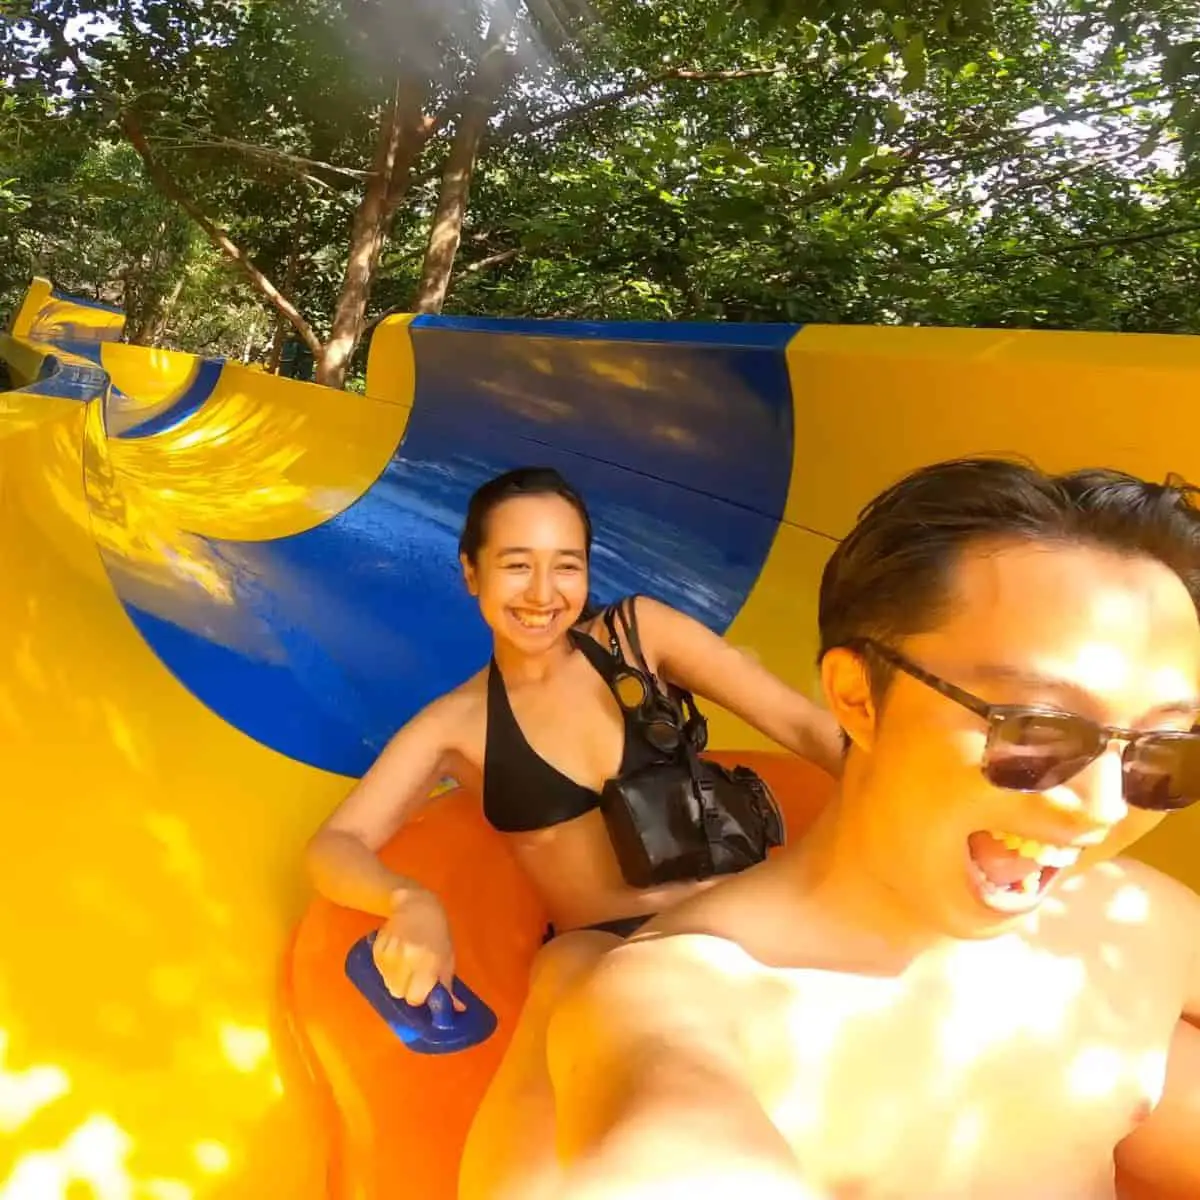 Victoria and Ruiz in worlds longest tube water slide in Escape Penang